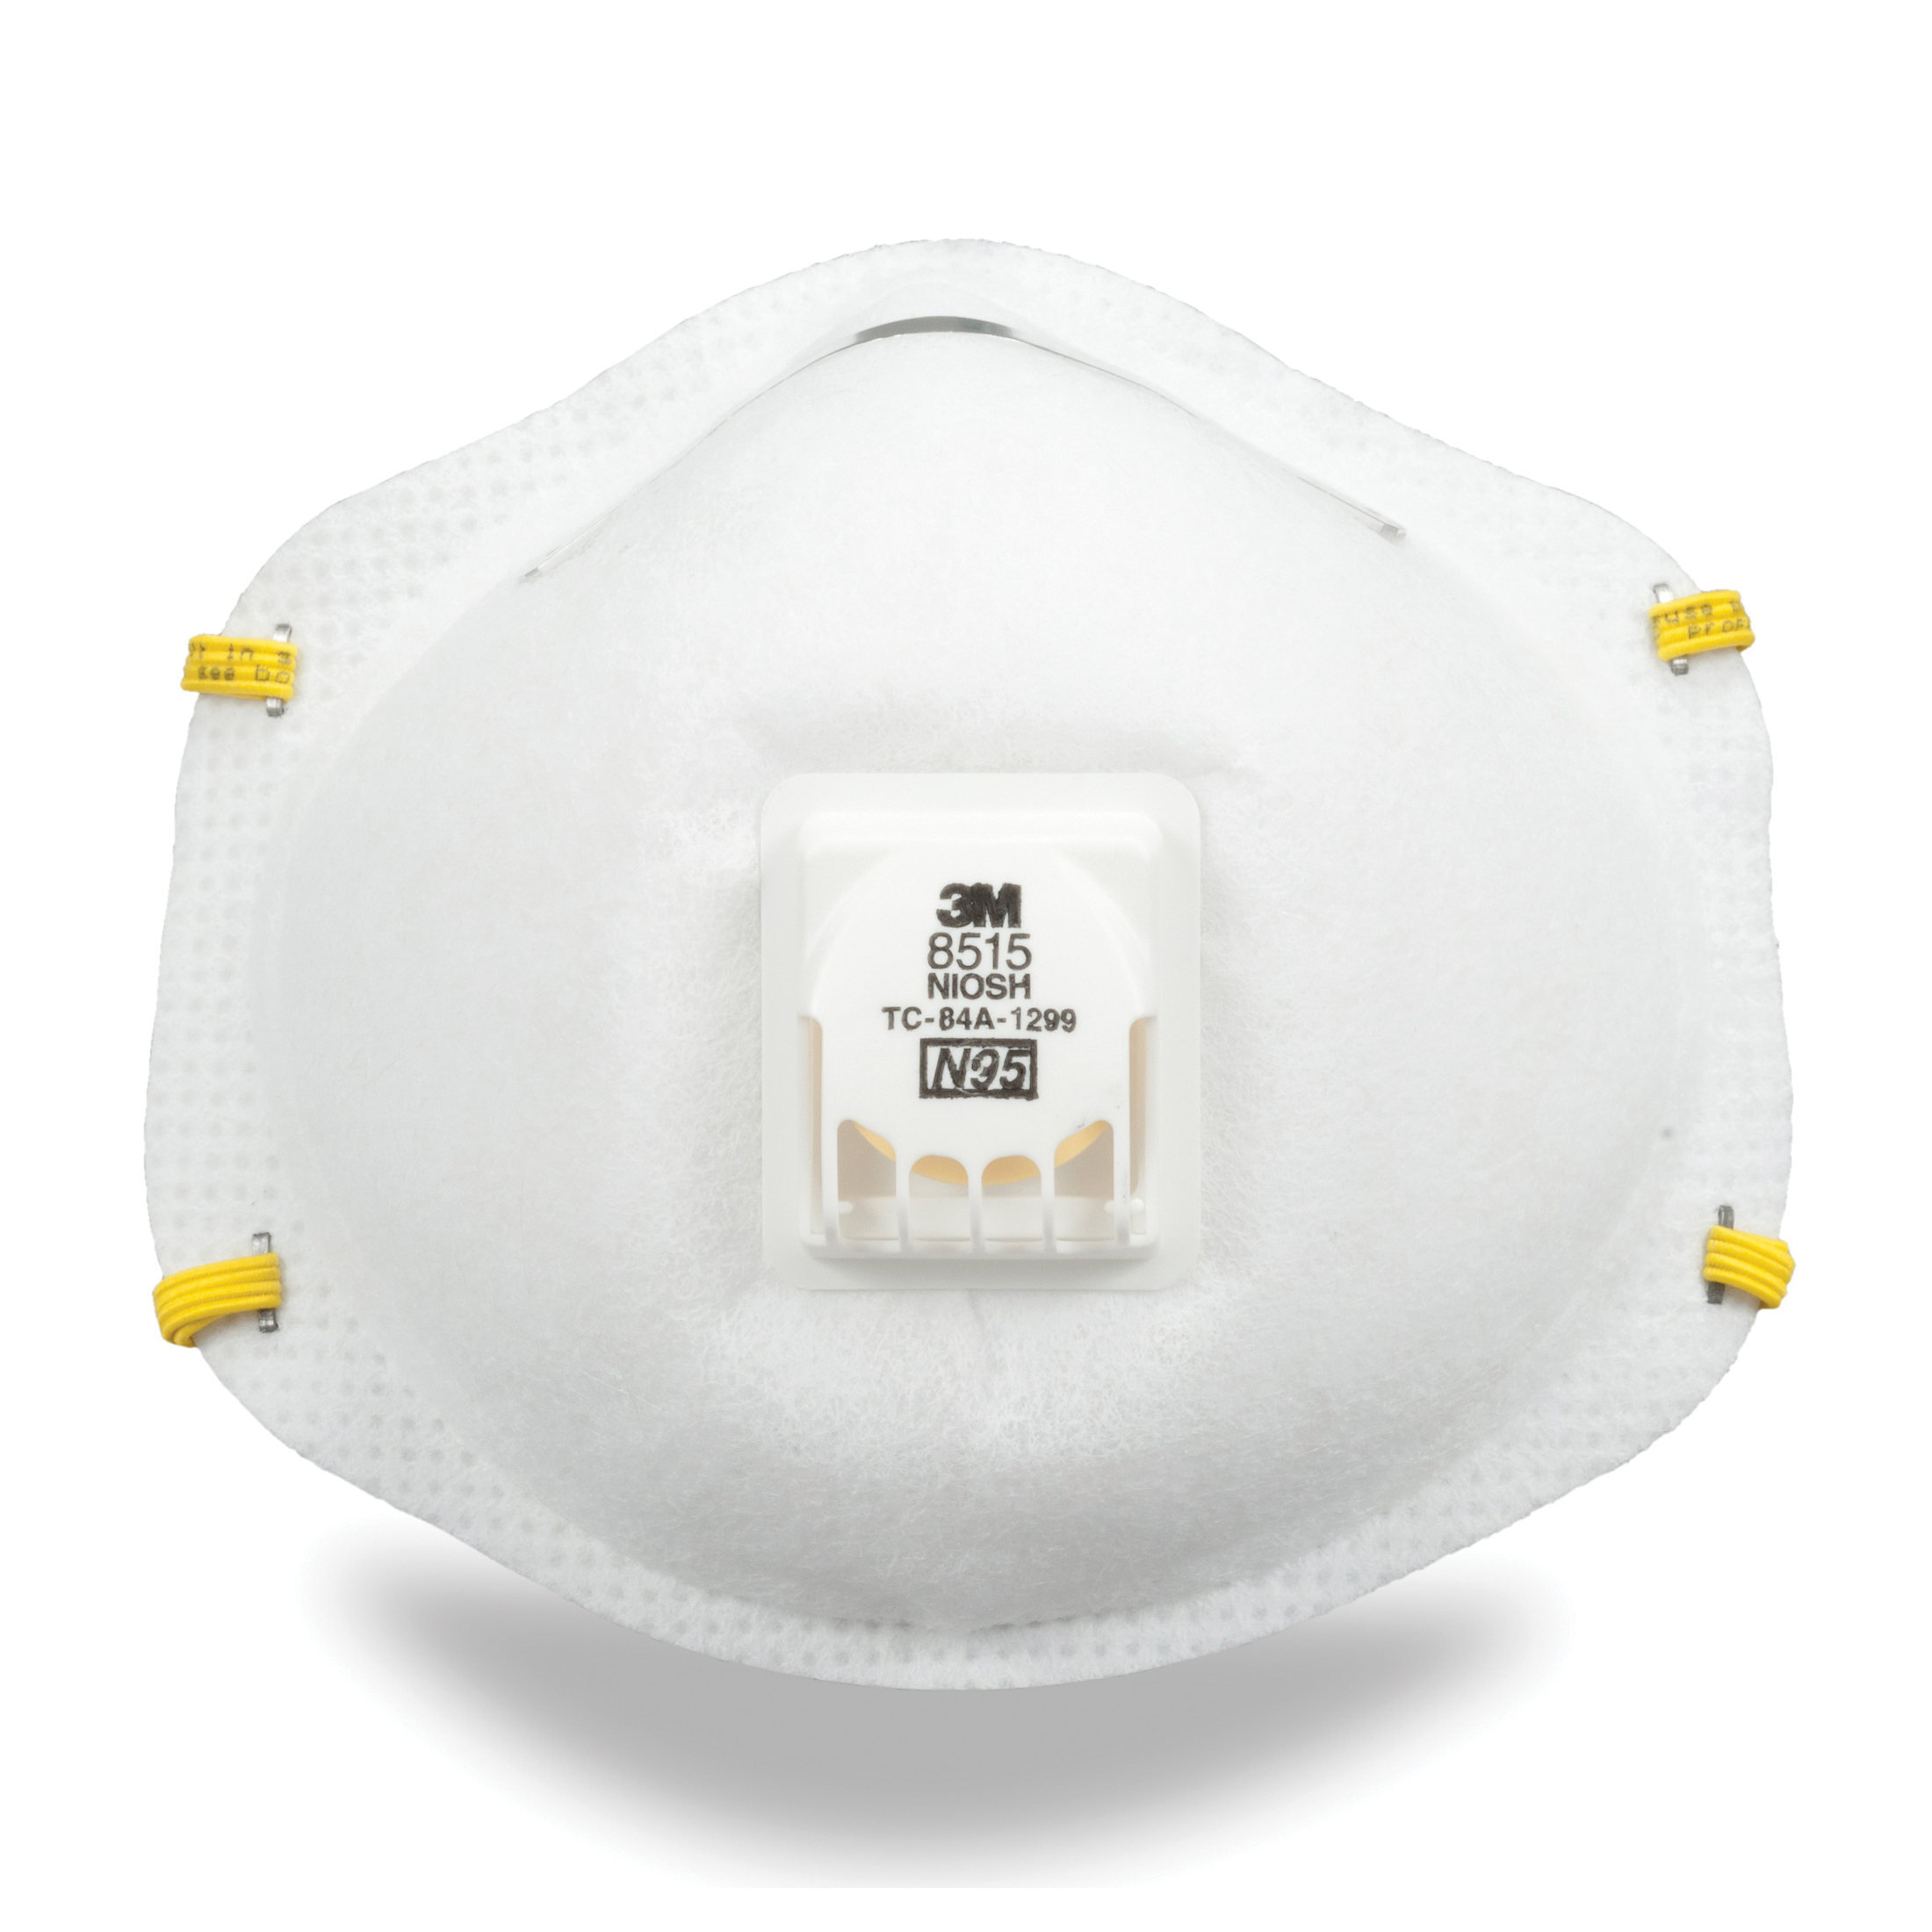 3M™ 051131-07189 8515 Cup Style Disposable Particulate Welding Respirator With Cool Flow™ Exhalation Valve and Adjustable M-Nose Clip, Standard, Resists: Certain Non-Oil Based Particles